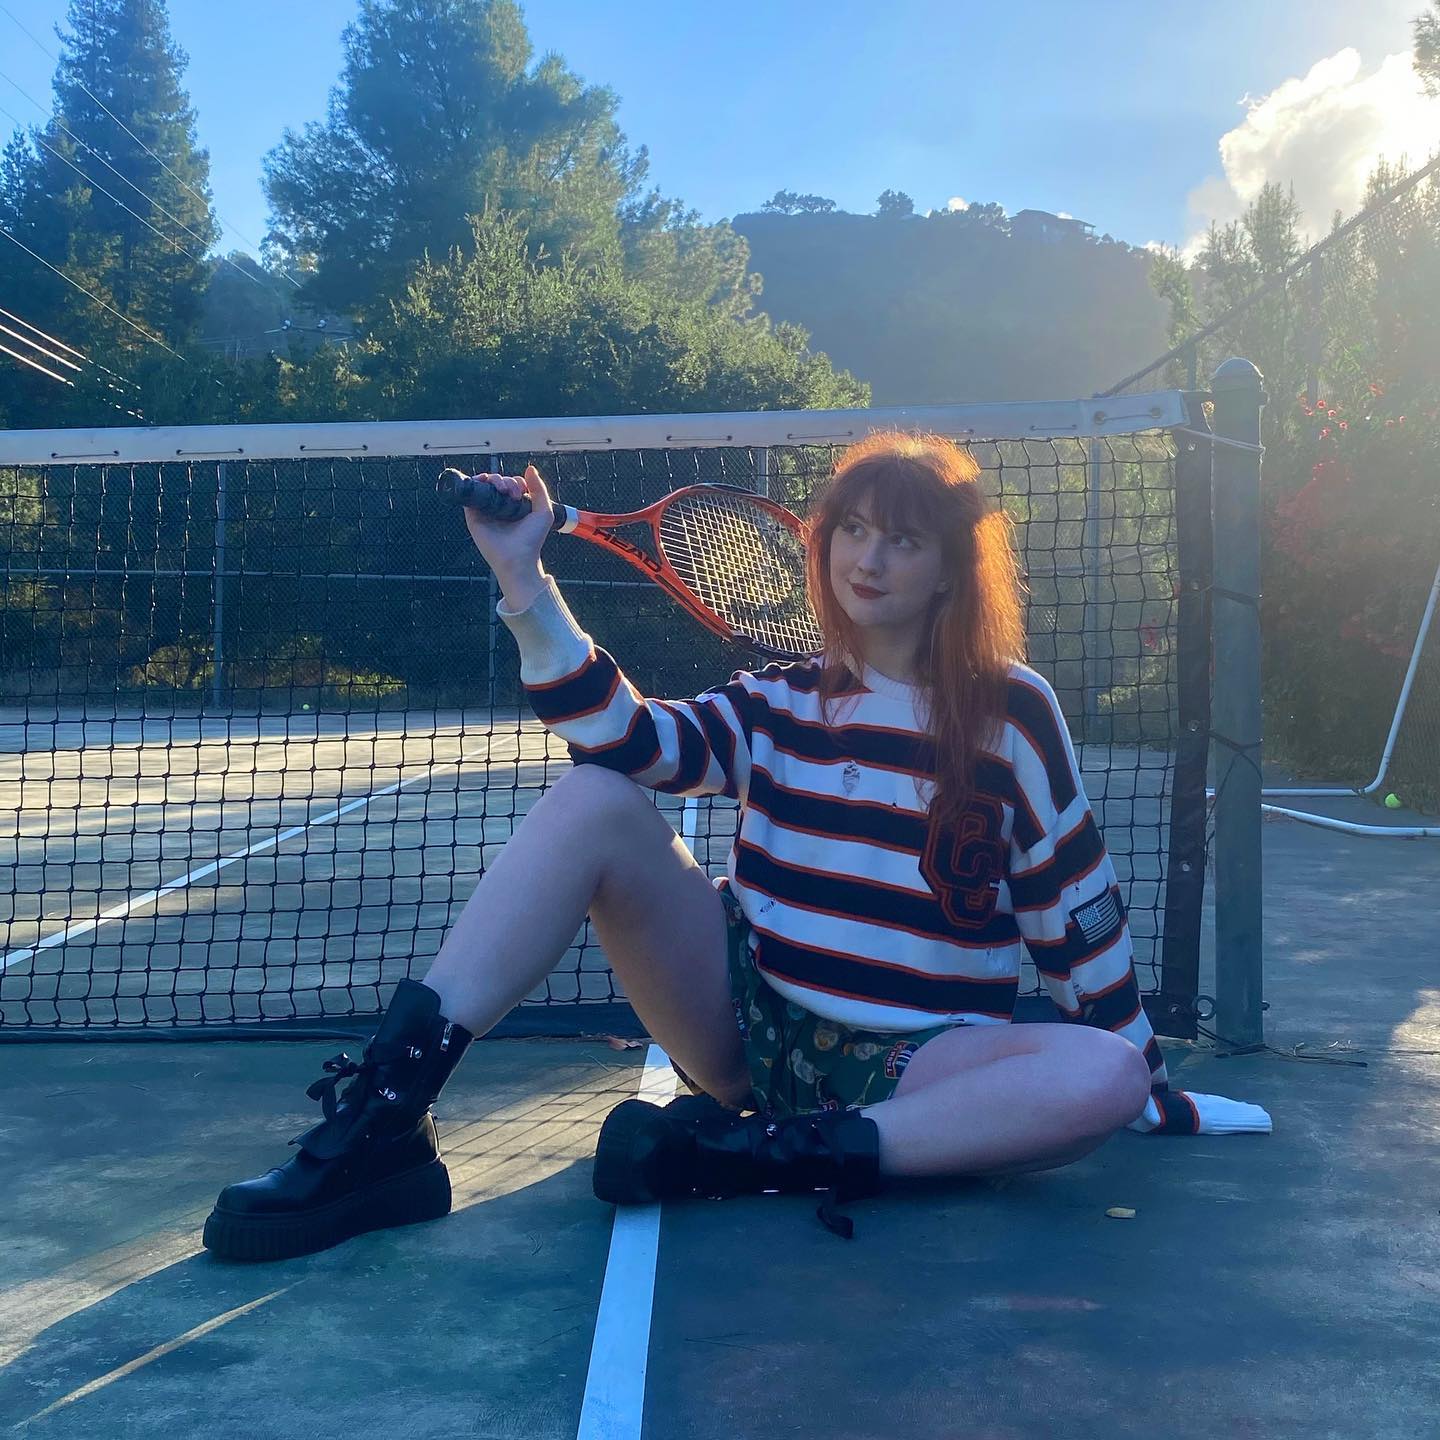 never played tennis a day in my life but don’t I look absolutely DARLING 🎾